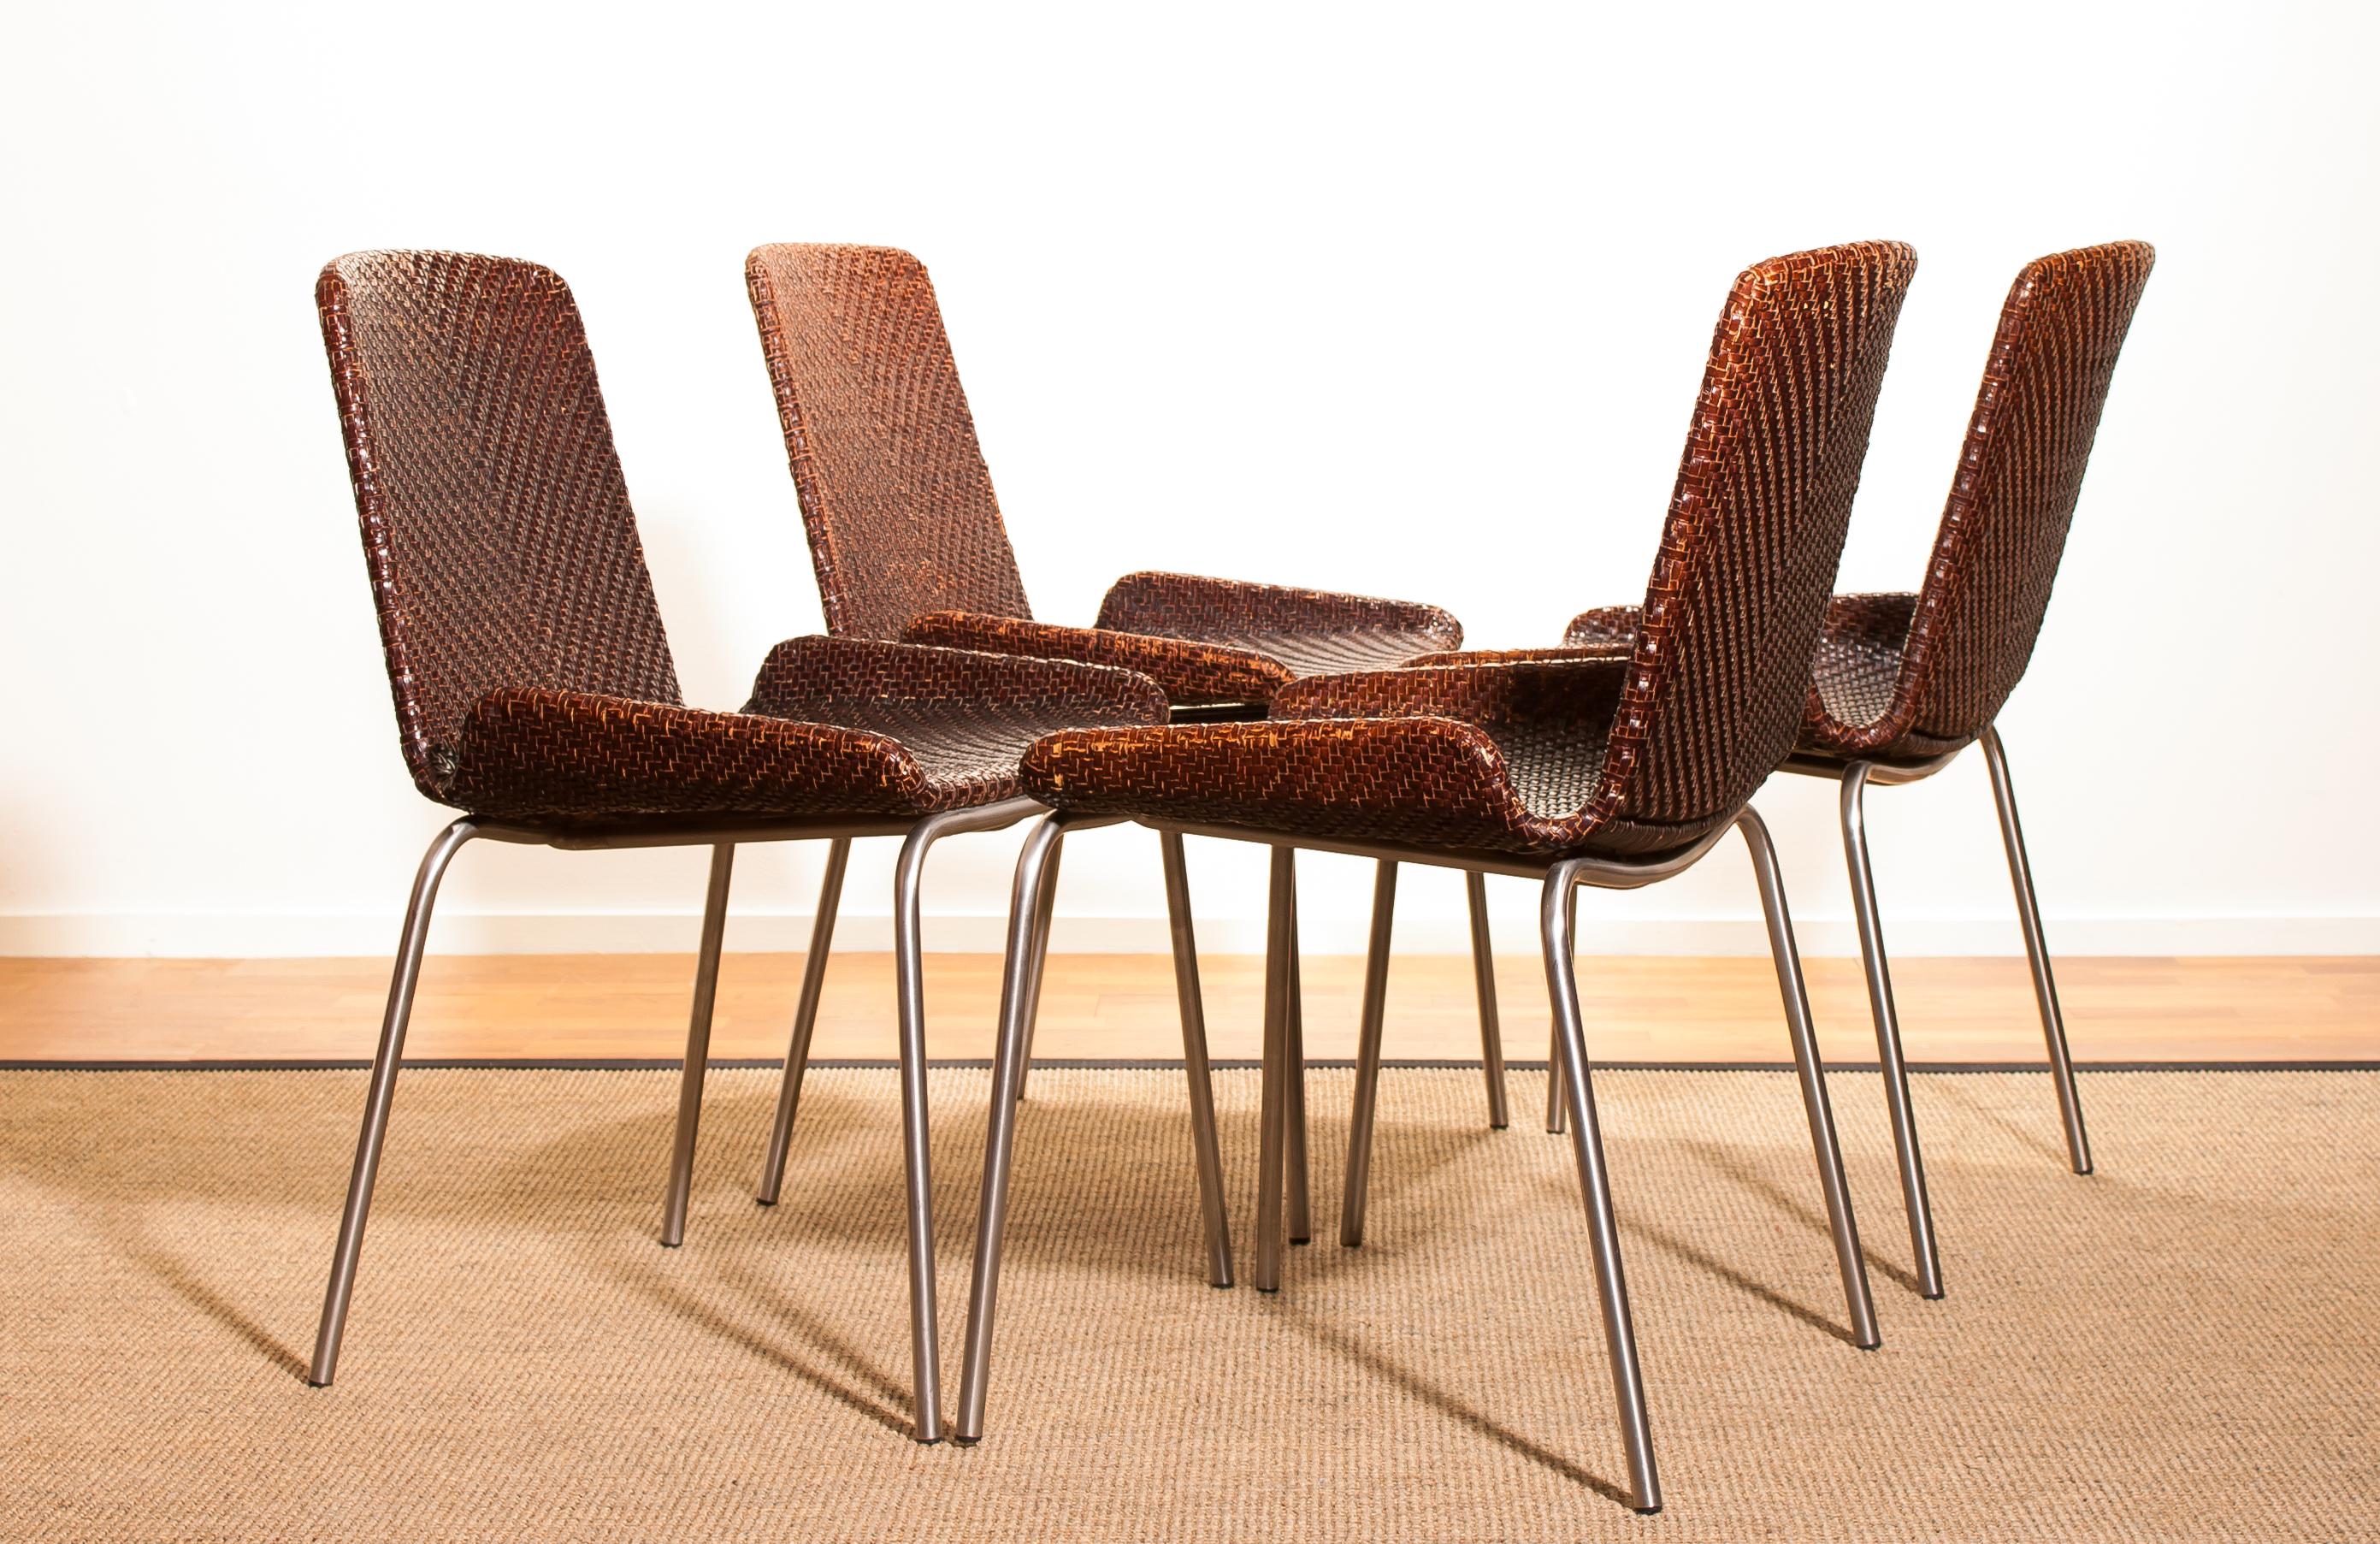 An amazing set of four dining chairs made in Italy.
These chairs have a brown leather braided seating and backrest on a steel frame.
They are in a wonderful condition.
Period 1960s
Dimensions: H 84 cm, W 51 cm, D 45 cm, SH 46 cm.
    